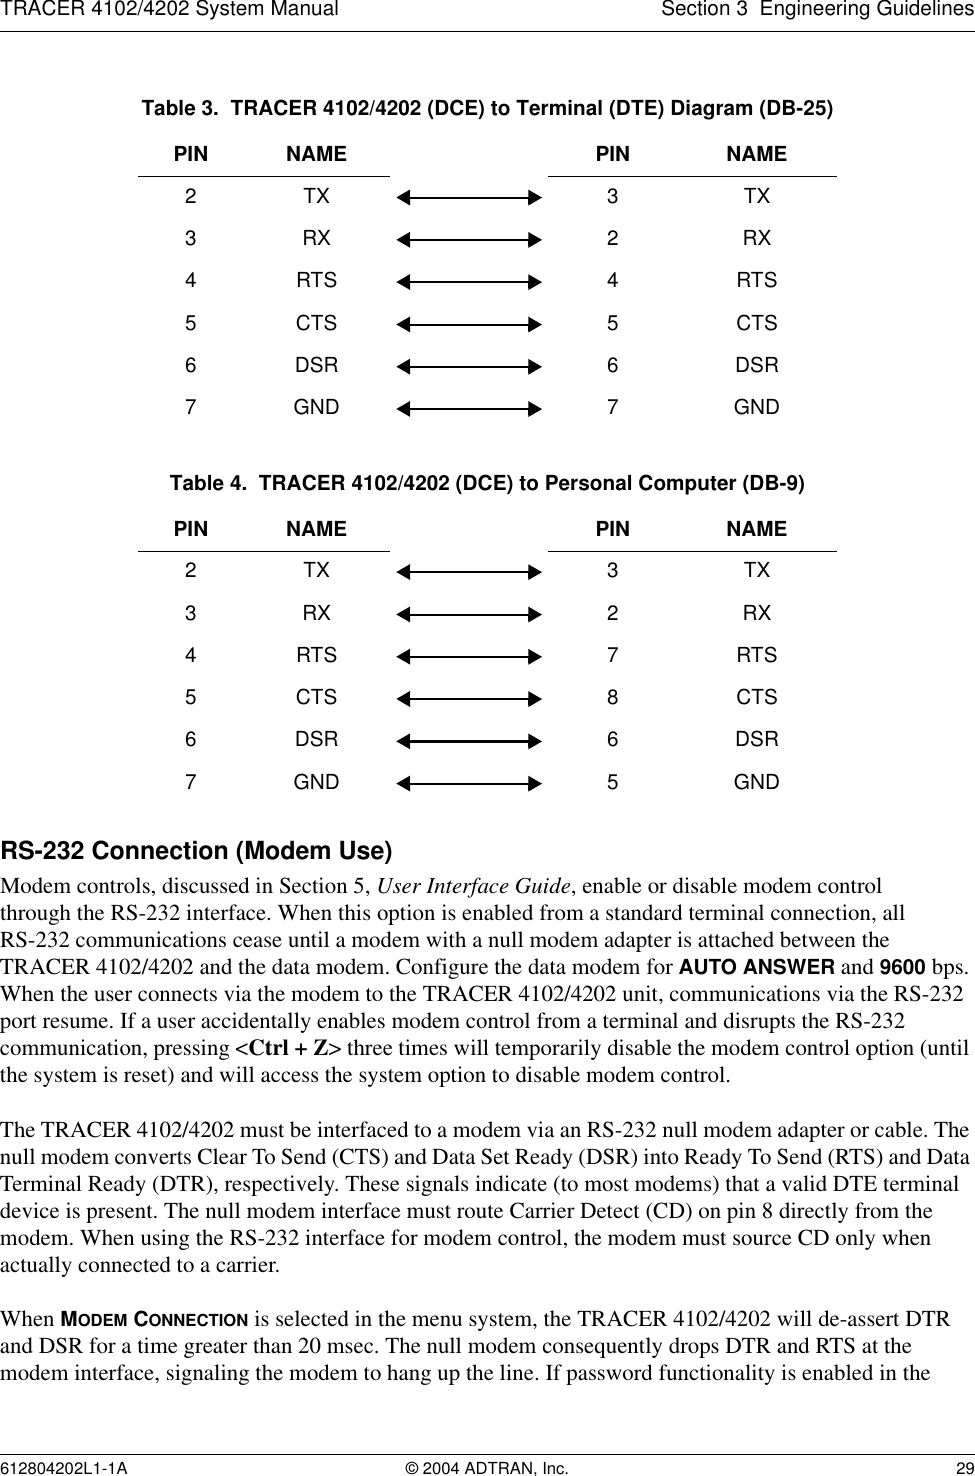 TRACER 4102/4202 System Manual Section 3  Engineering Guidelines612804202L1-1A © 2004 ADTRAN, Inc. 29RS-232 Connection (Modem Use)Modem controls, discussed in Section 5, User Interface Guide, enable or disable modem controlthrough the RS-232 interface. When this option is enabled from a standard terminal connection, allRS-232 communications cease until a modem with a null modem adapter is attached between the TRACER 4102/4202 and the data modem. Configure the data modem for AUTO ANSWER and 9600 bps. When the user connects via the modem to the TRACER 4102/4202 unit, communications via the RS-232 port resume. If a user accidentally enables modem control from a terminal and disrupts the RS-232 communication, pressing &lt;Ctrl + Z&gt; three times will temporarily disable the modem control option (until the system is reset) and will access the system option to disable modem control.The TRACER 4102/4202 must be interfaced to a modem via an RS-232 null modem adapter or cable. The null modem converts Clear To Send (CTS) and Data Set Ready (DSR) into Ready To Send (RTS) and Data Terminal Ready (DTR), respectively. These signals indicate (to most modems) that a valid DTE terminal device is present. The null modem interface must route Carrier Detect (CD) on pin 8 directly from the modem. When using the RS-232 interface for modem control, the modem must source CD only when actually connected to a carrier.When MODEM CONNECTION is selected in the menu system, the TRACER 4102/4202 will de-assert DTR and DSR for a time greater than 20 msec. The null modem consequently drops DTR and RTS at the modem interface, signaling the modem to hang up the line. If password functionality is enabled in the Table 3.  TRACER 4102/4202 (DCE) to Terminal (DTE) Diagram (DB-25)PIN NAME PIN NAME2TX 3TX3RX 2RX4RTS 4RTS5CTS 5CTS6DSR 6DSR7 GND 7 GNDTable 4.  TRACER 4102/4202 (DCE) to Personal Computer (DB-9)PIN NAME PIN NAME2TX 3TX3RX 2RX4RTS 7RTS5CTS 8CTS6DSR 6DSR7 GND 5 GND